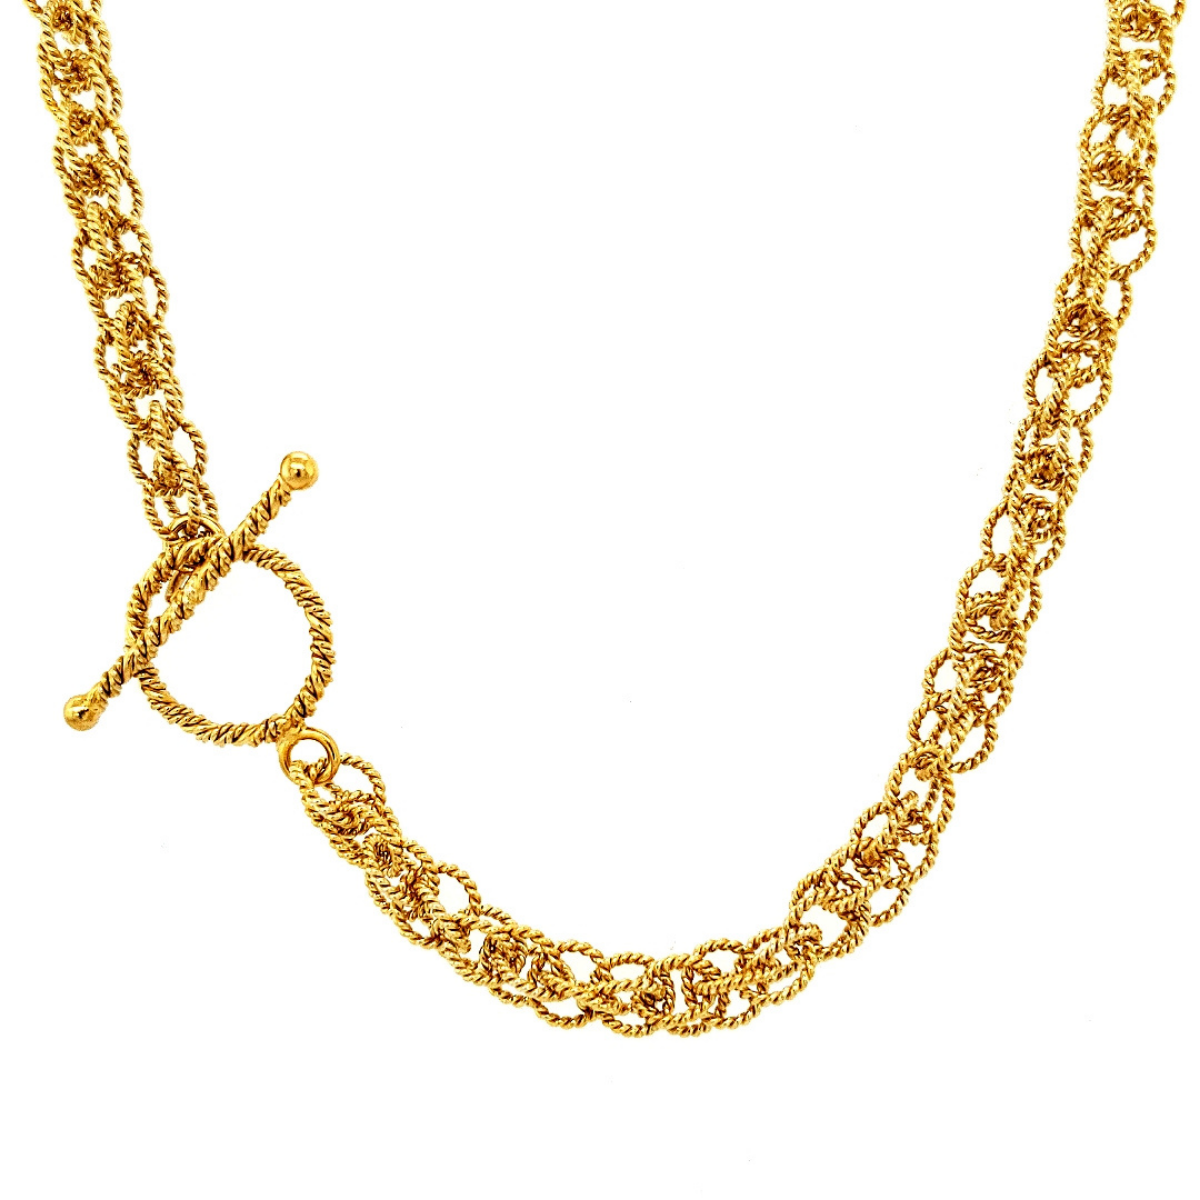 24K Vermeil 6mm Spinner Necklace clasp & chain white background / Arpaia Lang